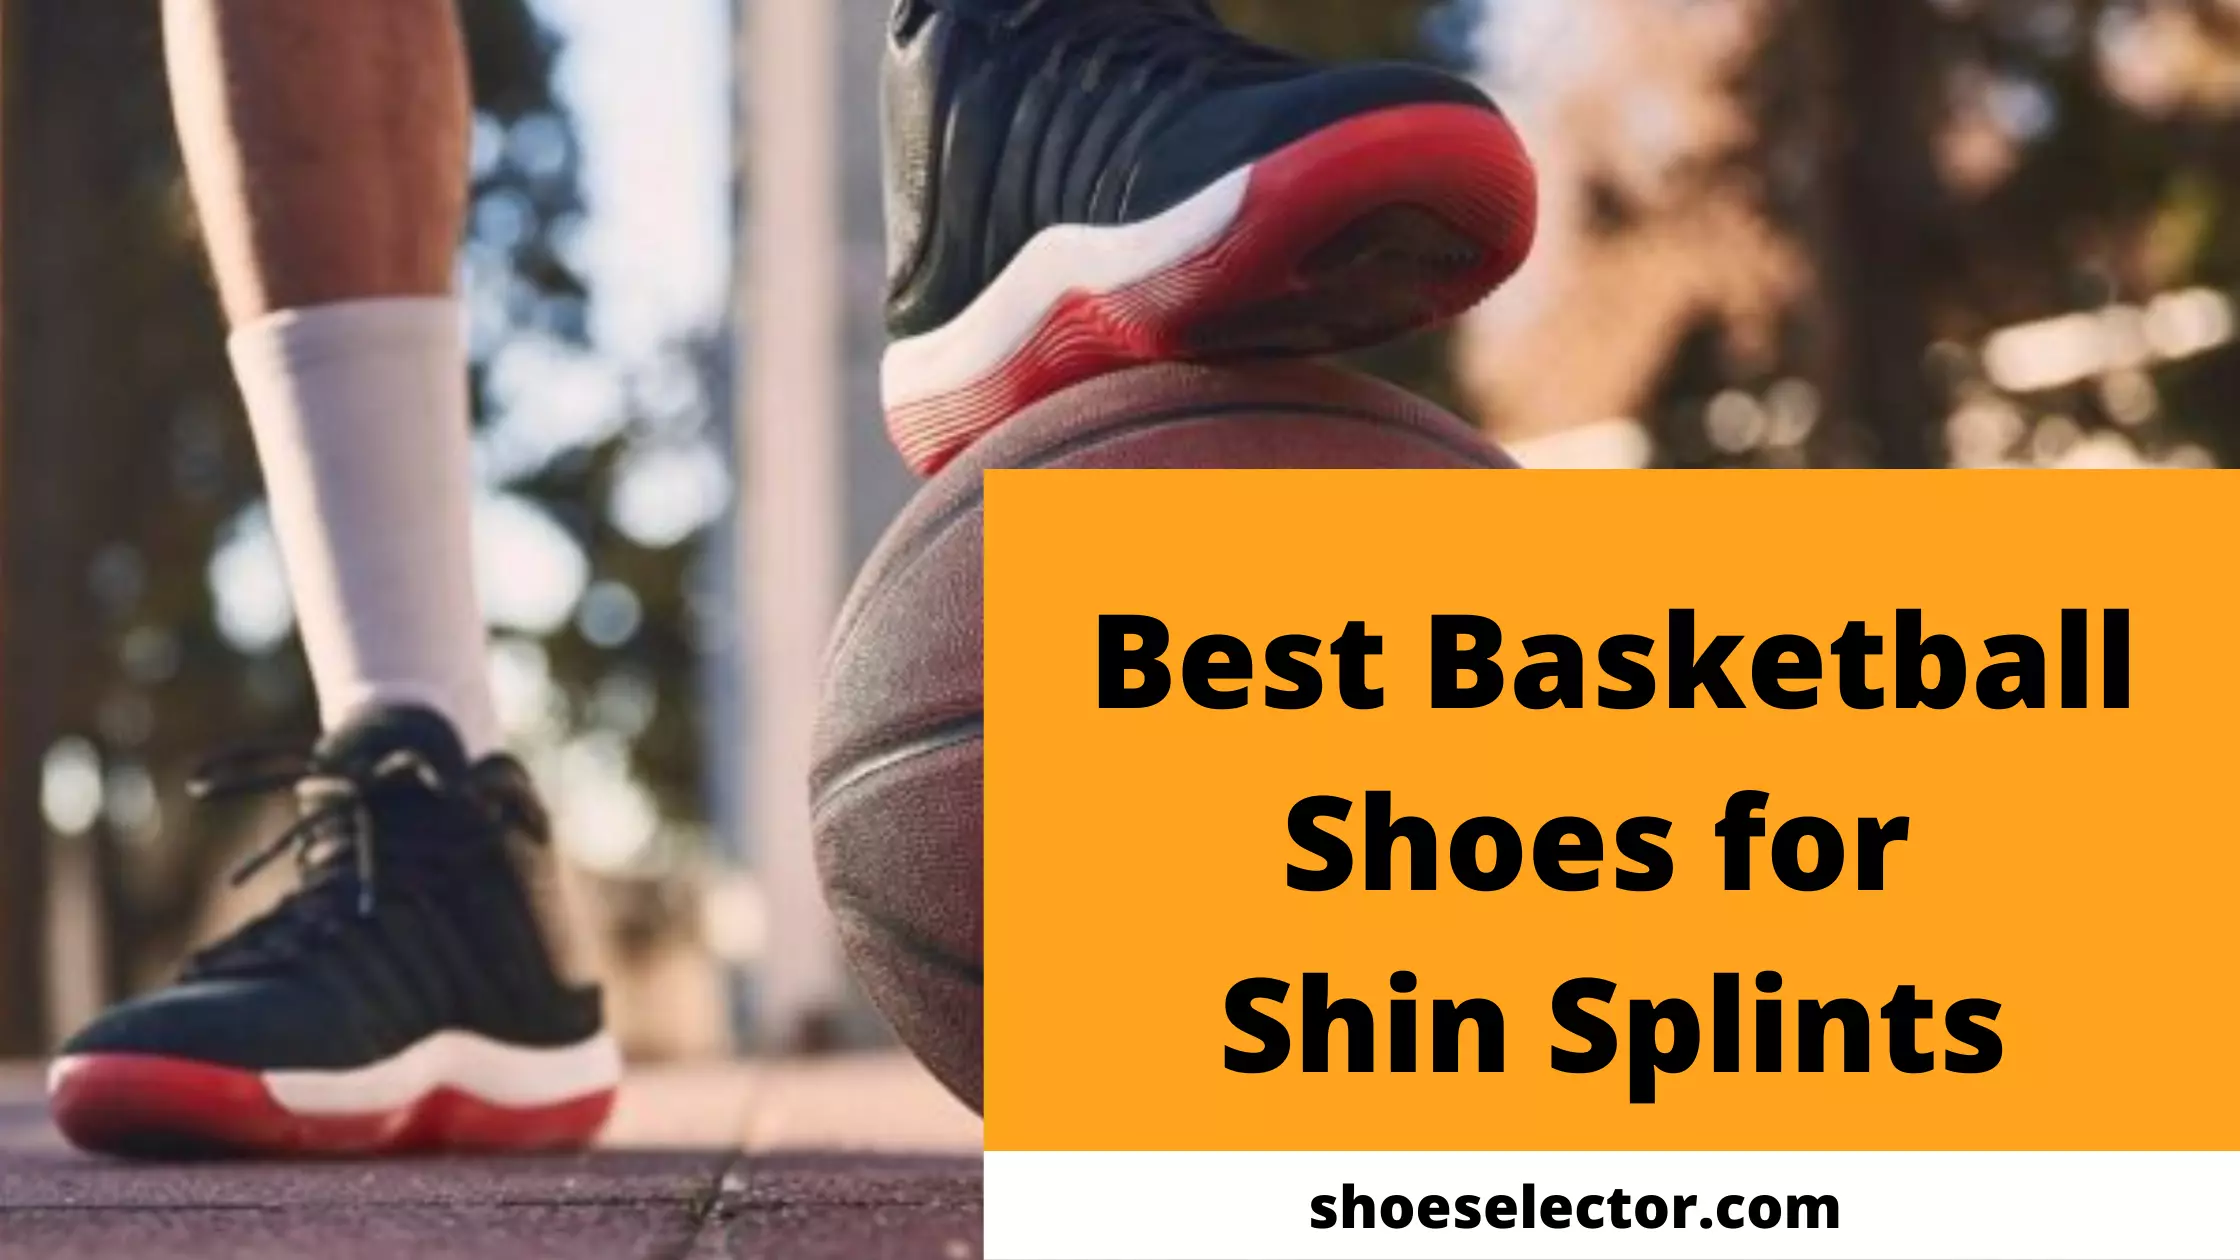 Best Basketball Shoes for Shin Splints - Reviews By Experts